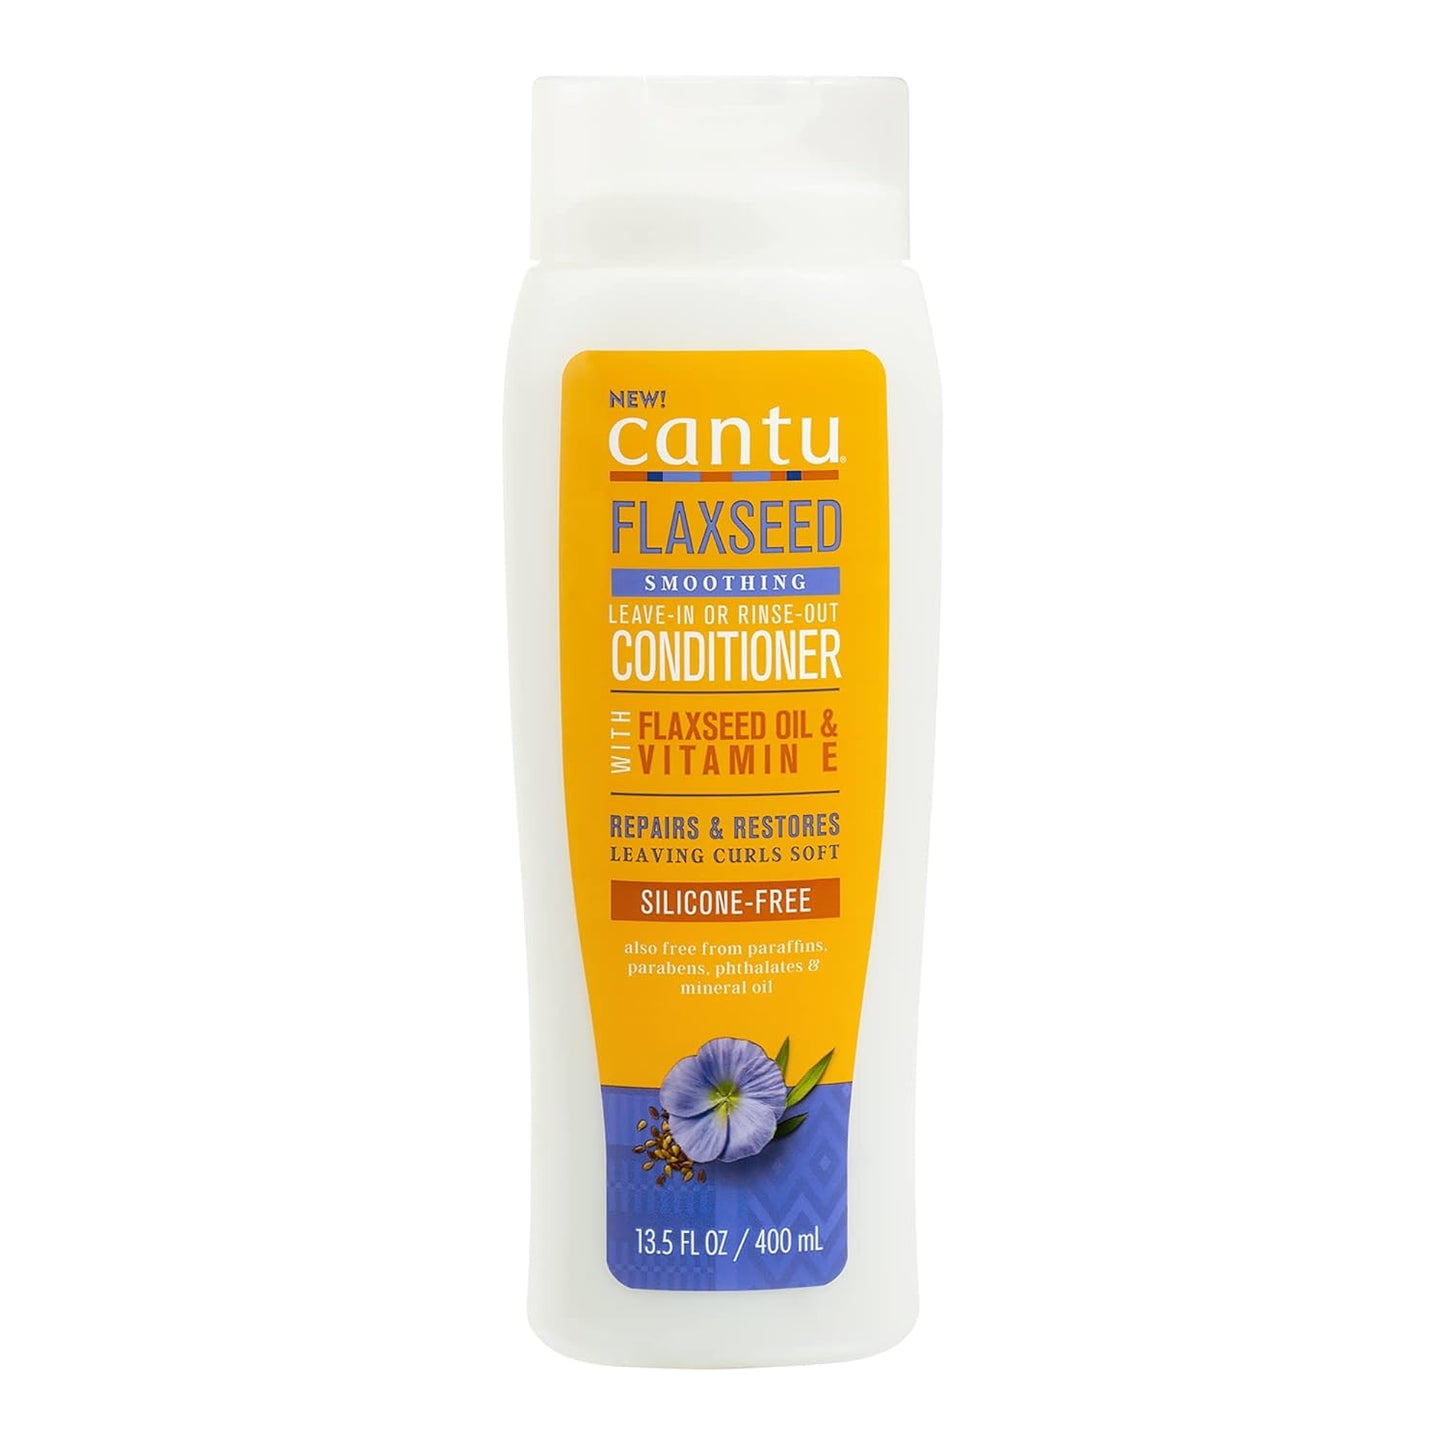 Cantu Flaxseed Conditioner Leave-In Or Rinse-Out 400ml